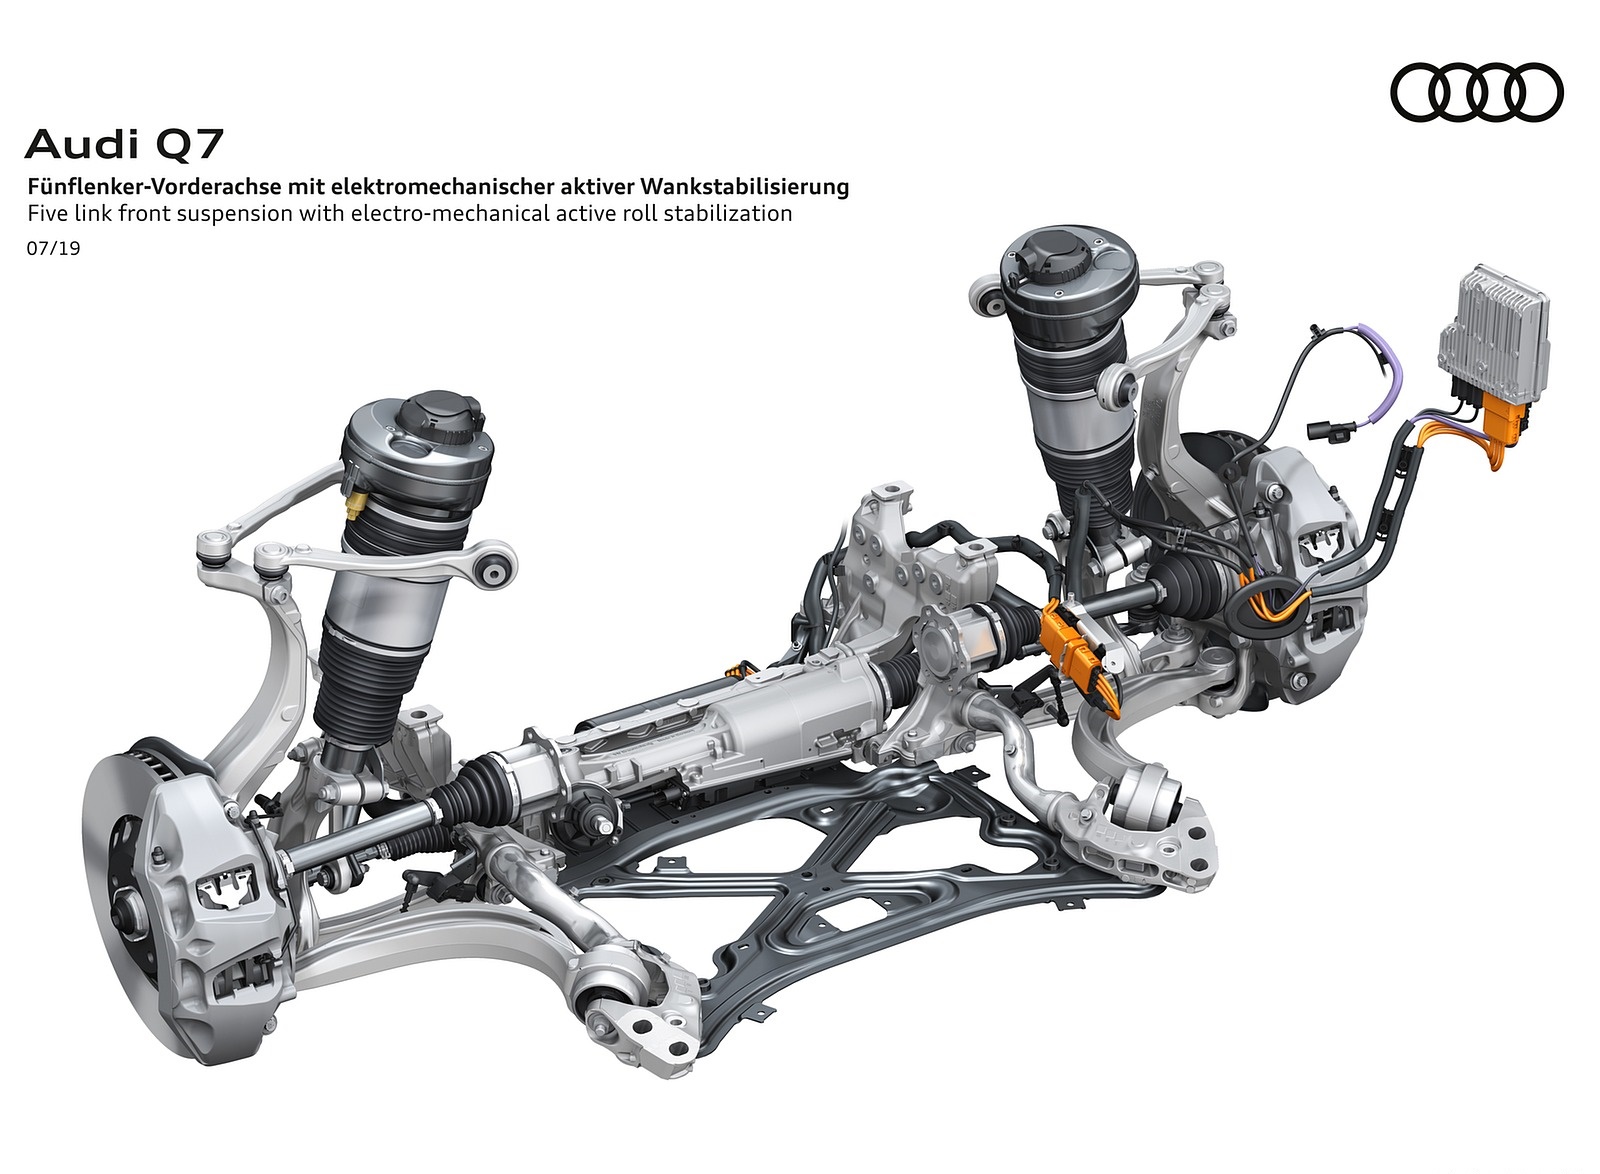 2020 Audi Q7 Five link front suspension with electro-mechanical active roll stabilization Wallpapers #137 of 158